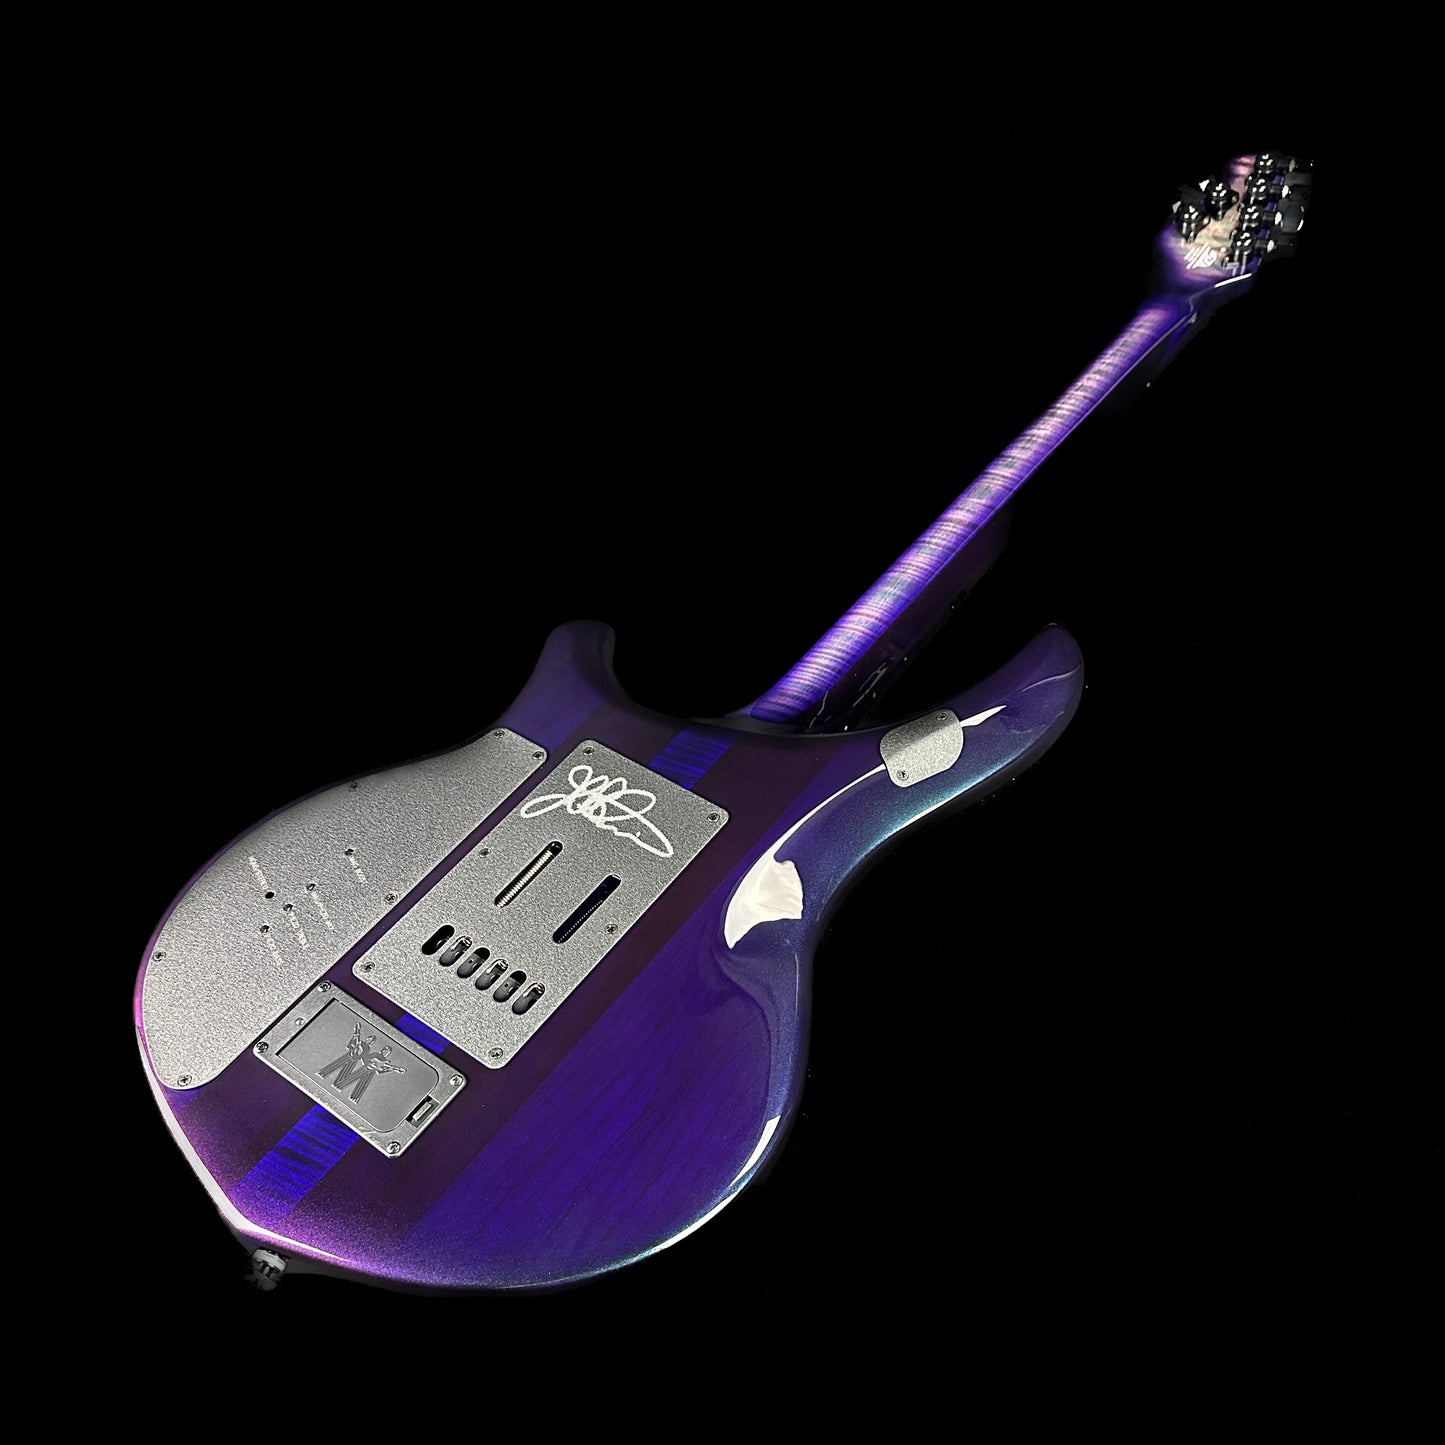 Back angle of Ernie Ball MusicMan Majesty 6 Limited Crystal Amethyst.